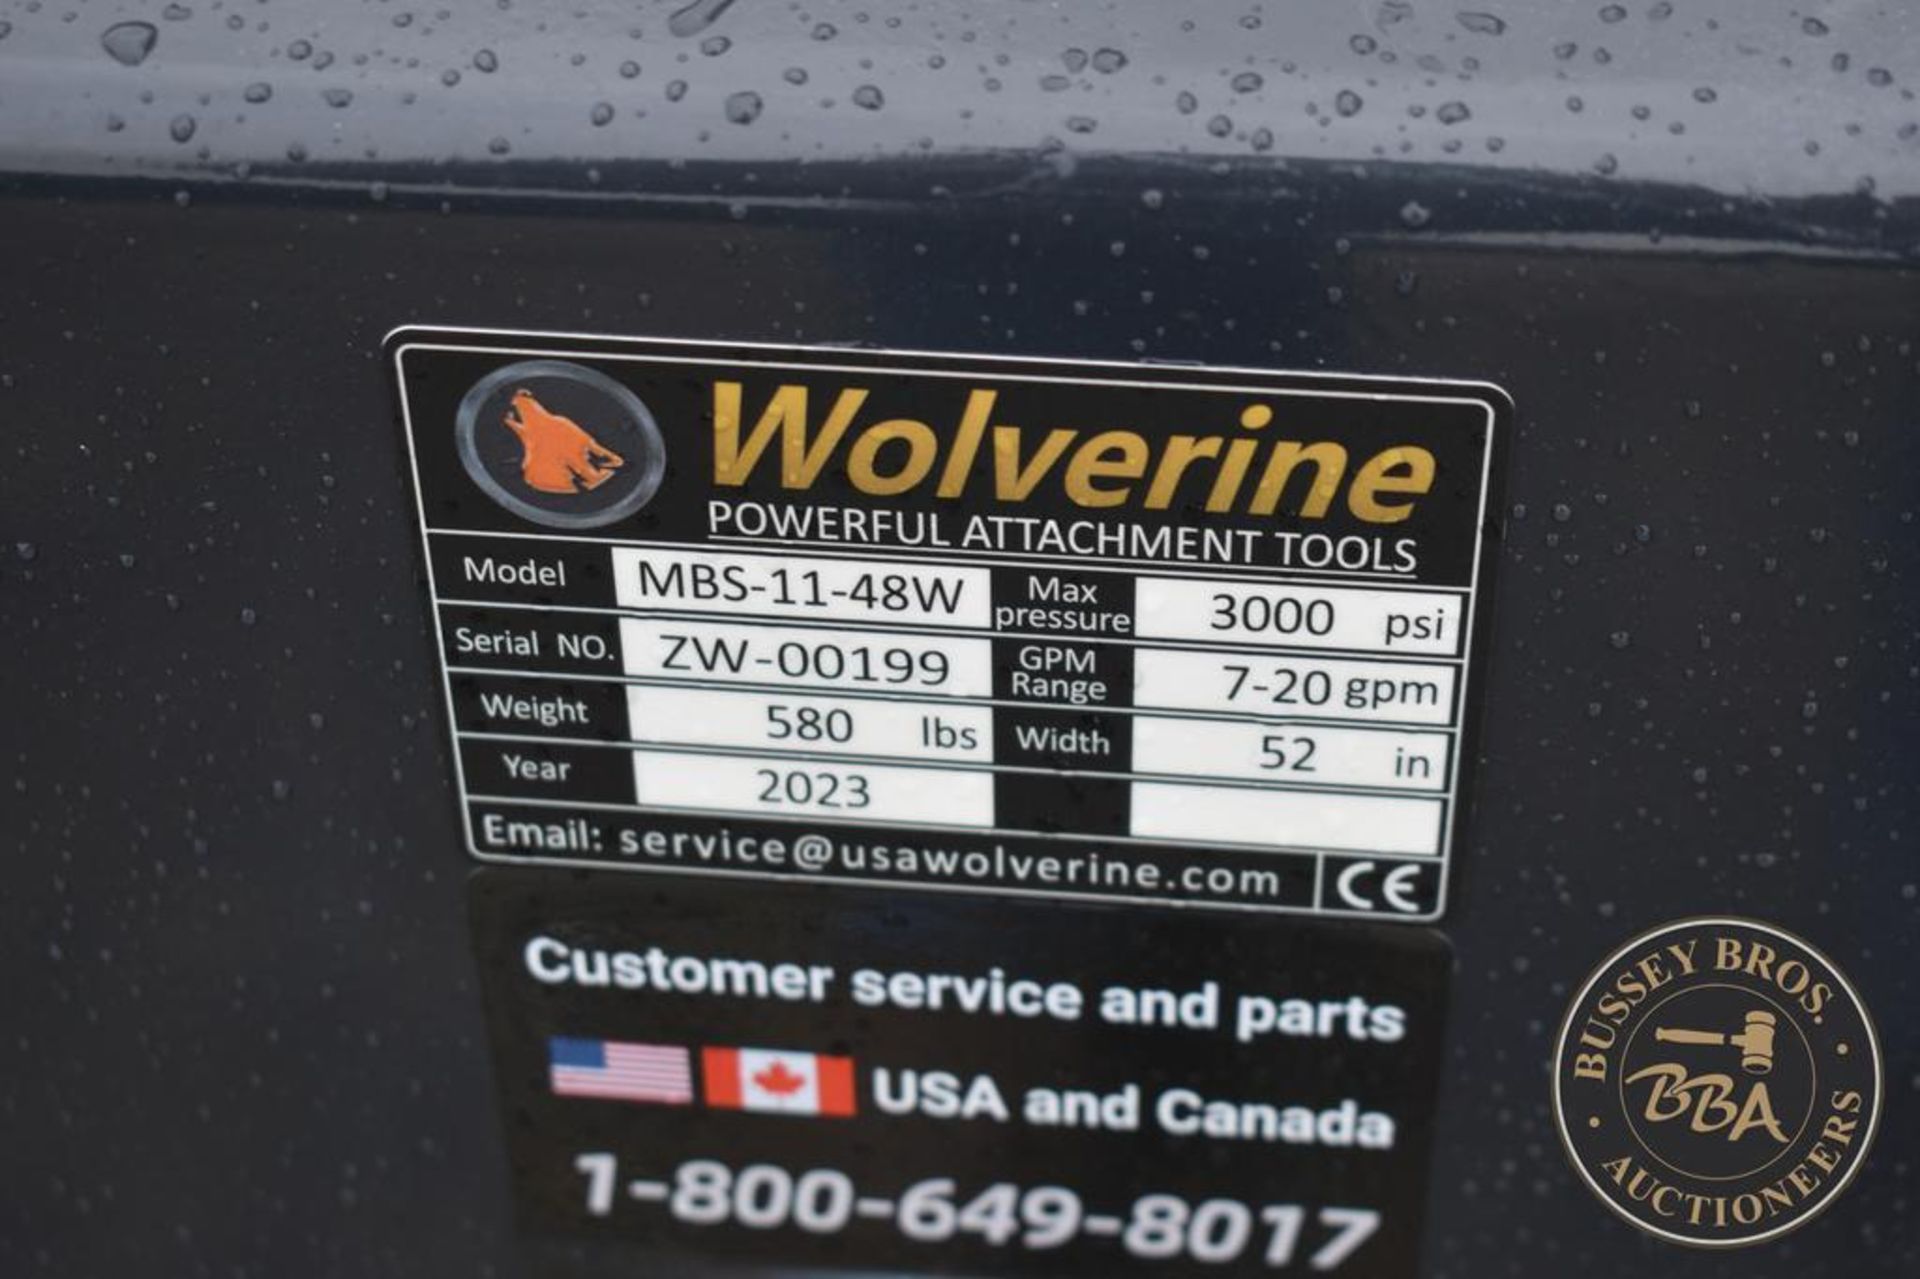 Sweeper WOLVERINE MBS-11-48W 27446 - Image 3 of 6